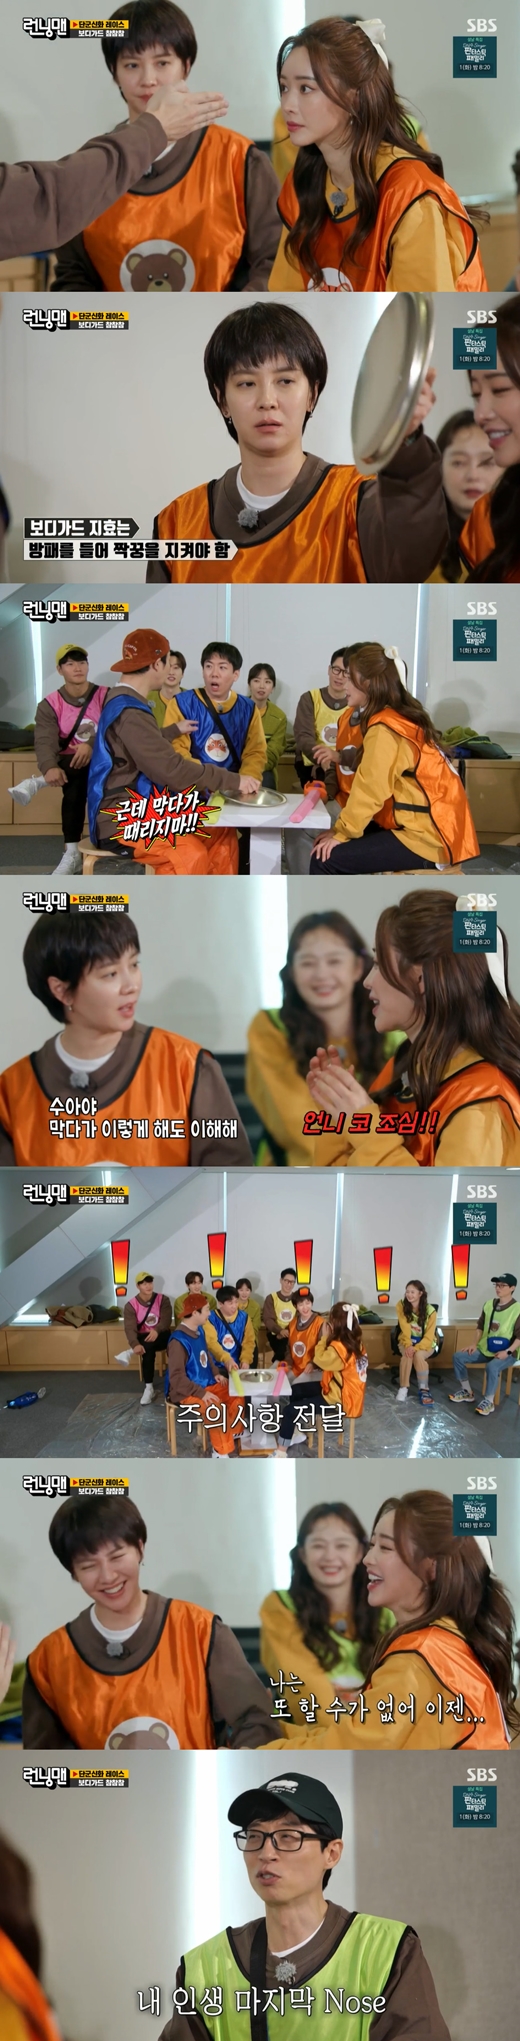 Actor Hong Soo-Ah showed off his entertainment with nose molding Disclosure.On SBS Running Man broadcasted on the afternoon of the 30th, the second race of Dangun Myth of the Year was drawn after last week.Guests included Tiger Tide Hong Soo-Ah, Bae Seul-Ki and Unhyuk.On this day, Running Man team was made up of two people, Yoo Jae-Suk - Jeon So-min, Kim Jong Kook - Eunhyuk, Ji Seok Jin - Bae Seul-Ki, Song Ji-hyo - Hong Soo-Ah, Haha - Yang Se-chan.The first mission to acquire garlic, Bodyguard Chamcham, has begun.2:2 The game is a game where one representative of each team plays Chamcham and the remaining one person attacks/defense with a sponge knife and pot lid.First, Haha - Yang Se-chan, Song Ji-hyo - Hong Soo-Ah team faced each other.Hong Soo-Ah lost to the true truth in the practice game, and Song Ji-hyo understood the rule of keeping Hong Soo-Ah with a shield while wandering.Yang Se-chan cautioned, You shouldnt hit me while youre stopping me. Then Hong Soo-Ah told Song Ji-hyo, Be careful with your sisters nose!I can not do it again, now the last nose, he shouted and laughed.With all the cast laughing, Yoo Jae-Suk was amused, saying, The last nose of my life.